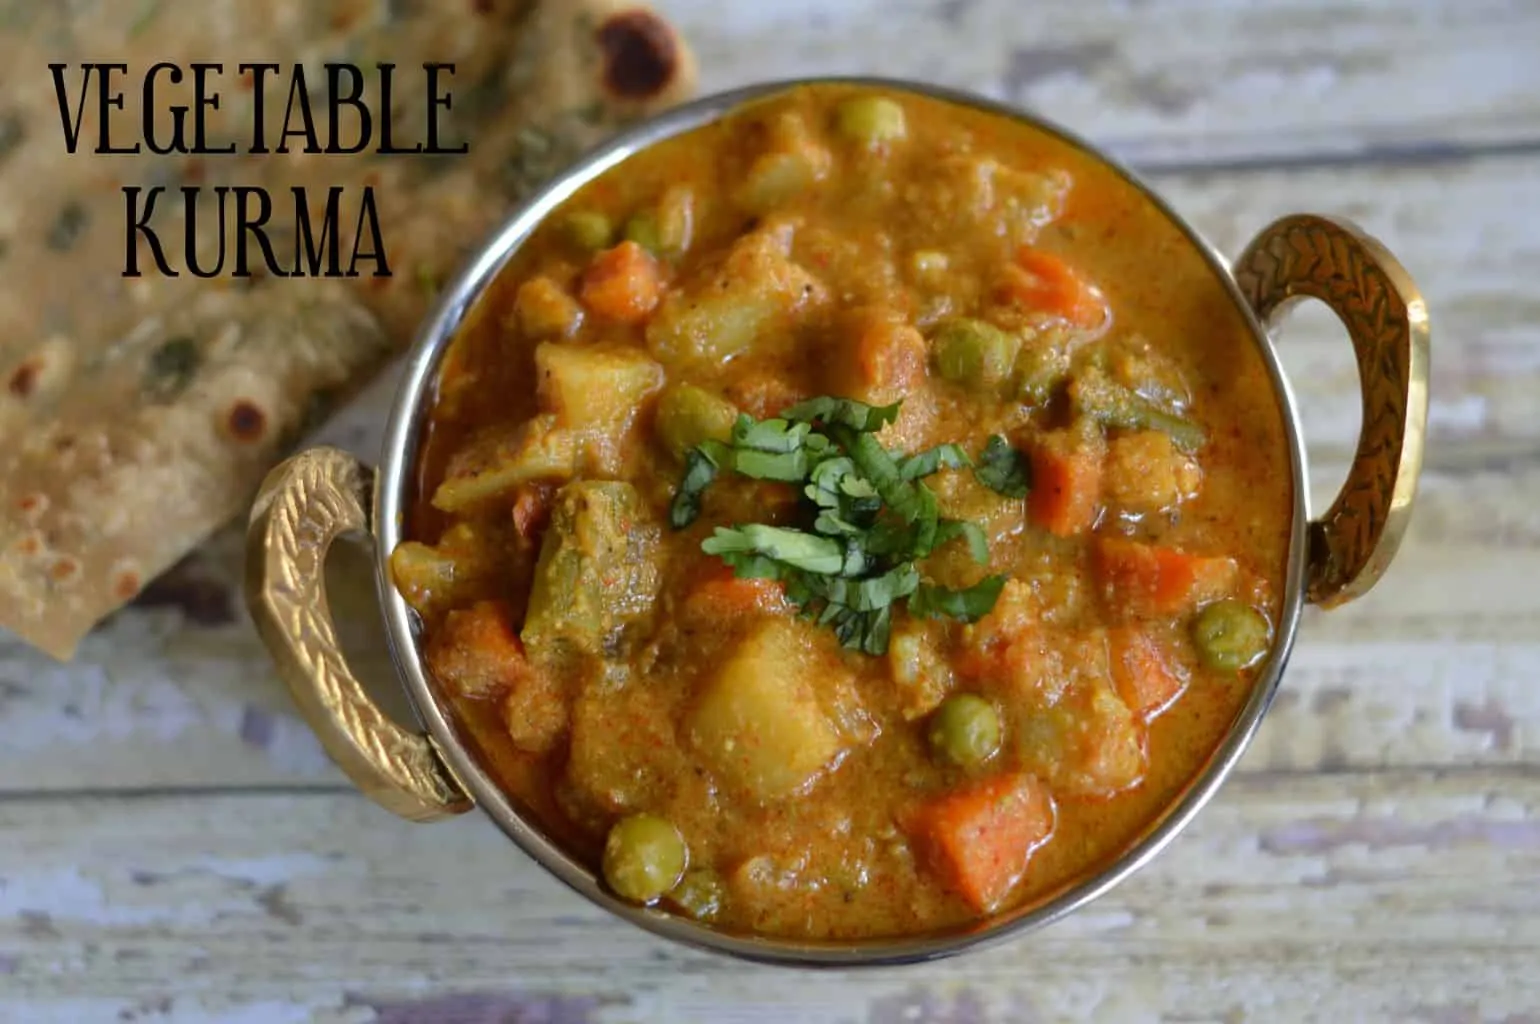 Vegetable Kurma served in a kadai garnished with cilantro with paratha on the side